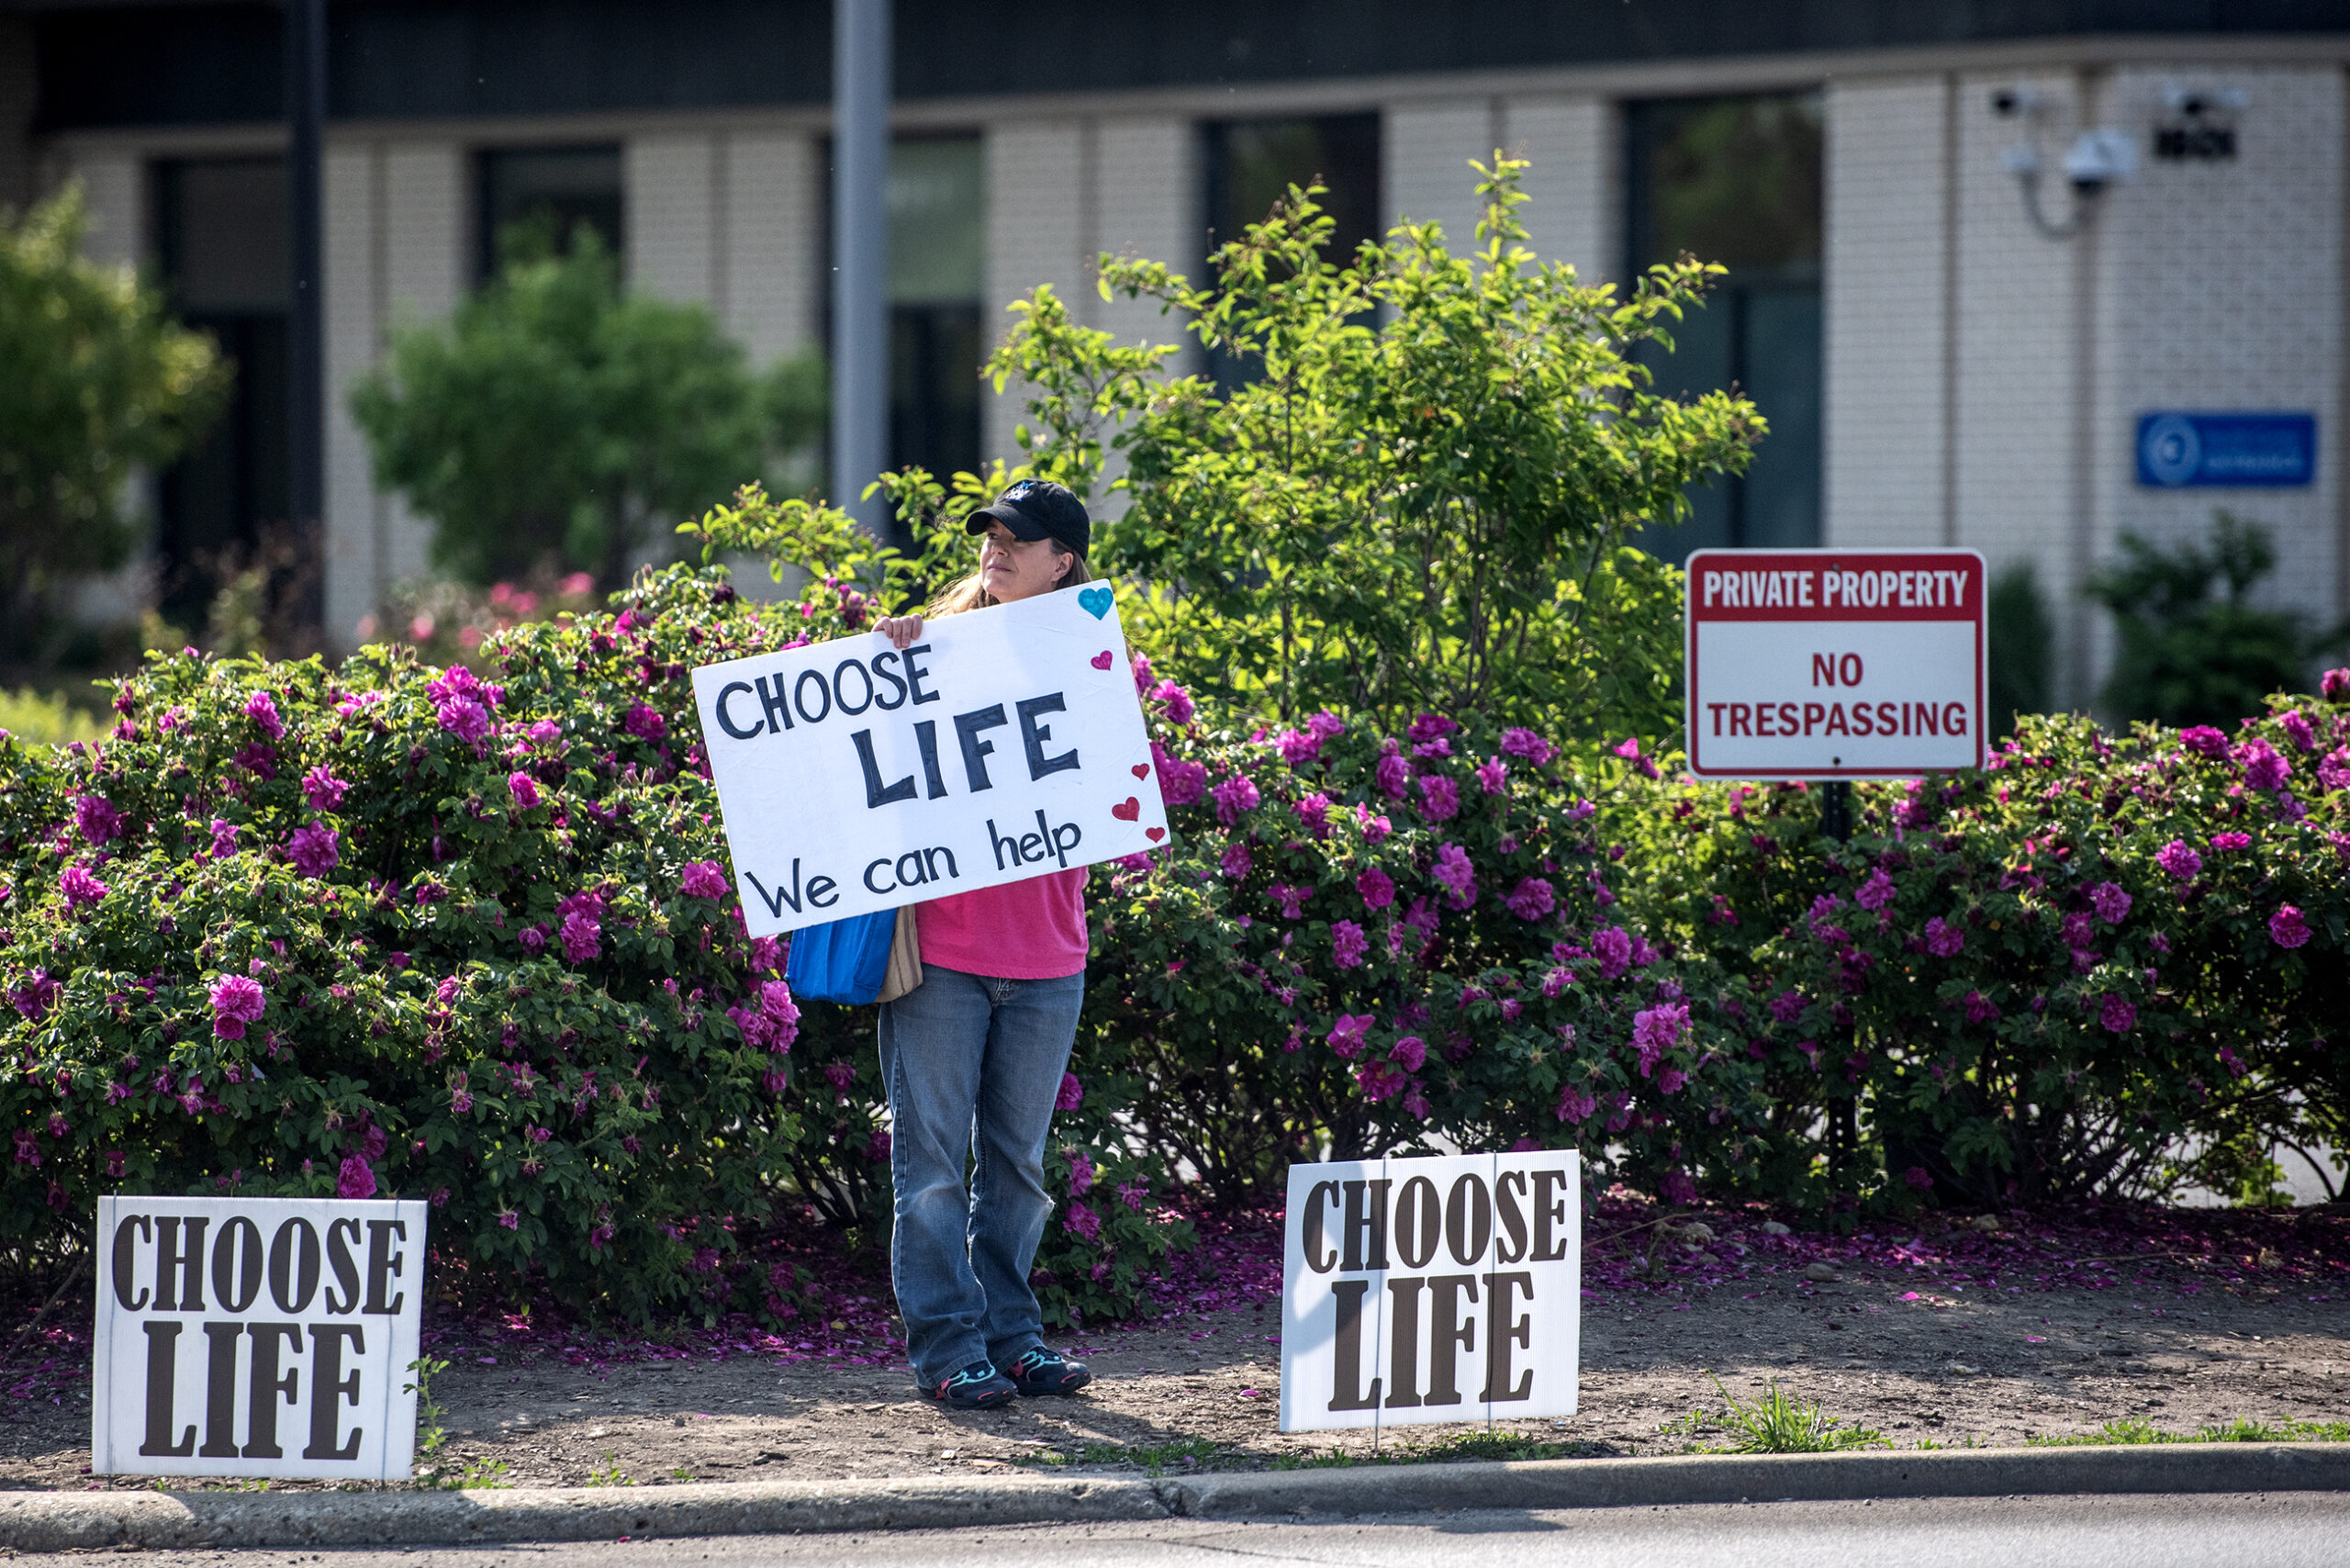 A protester holds a sign that says "Choose Life."